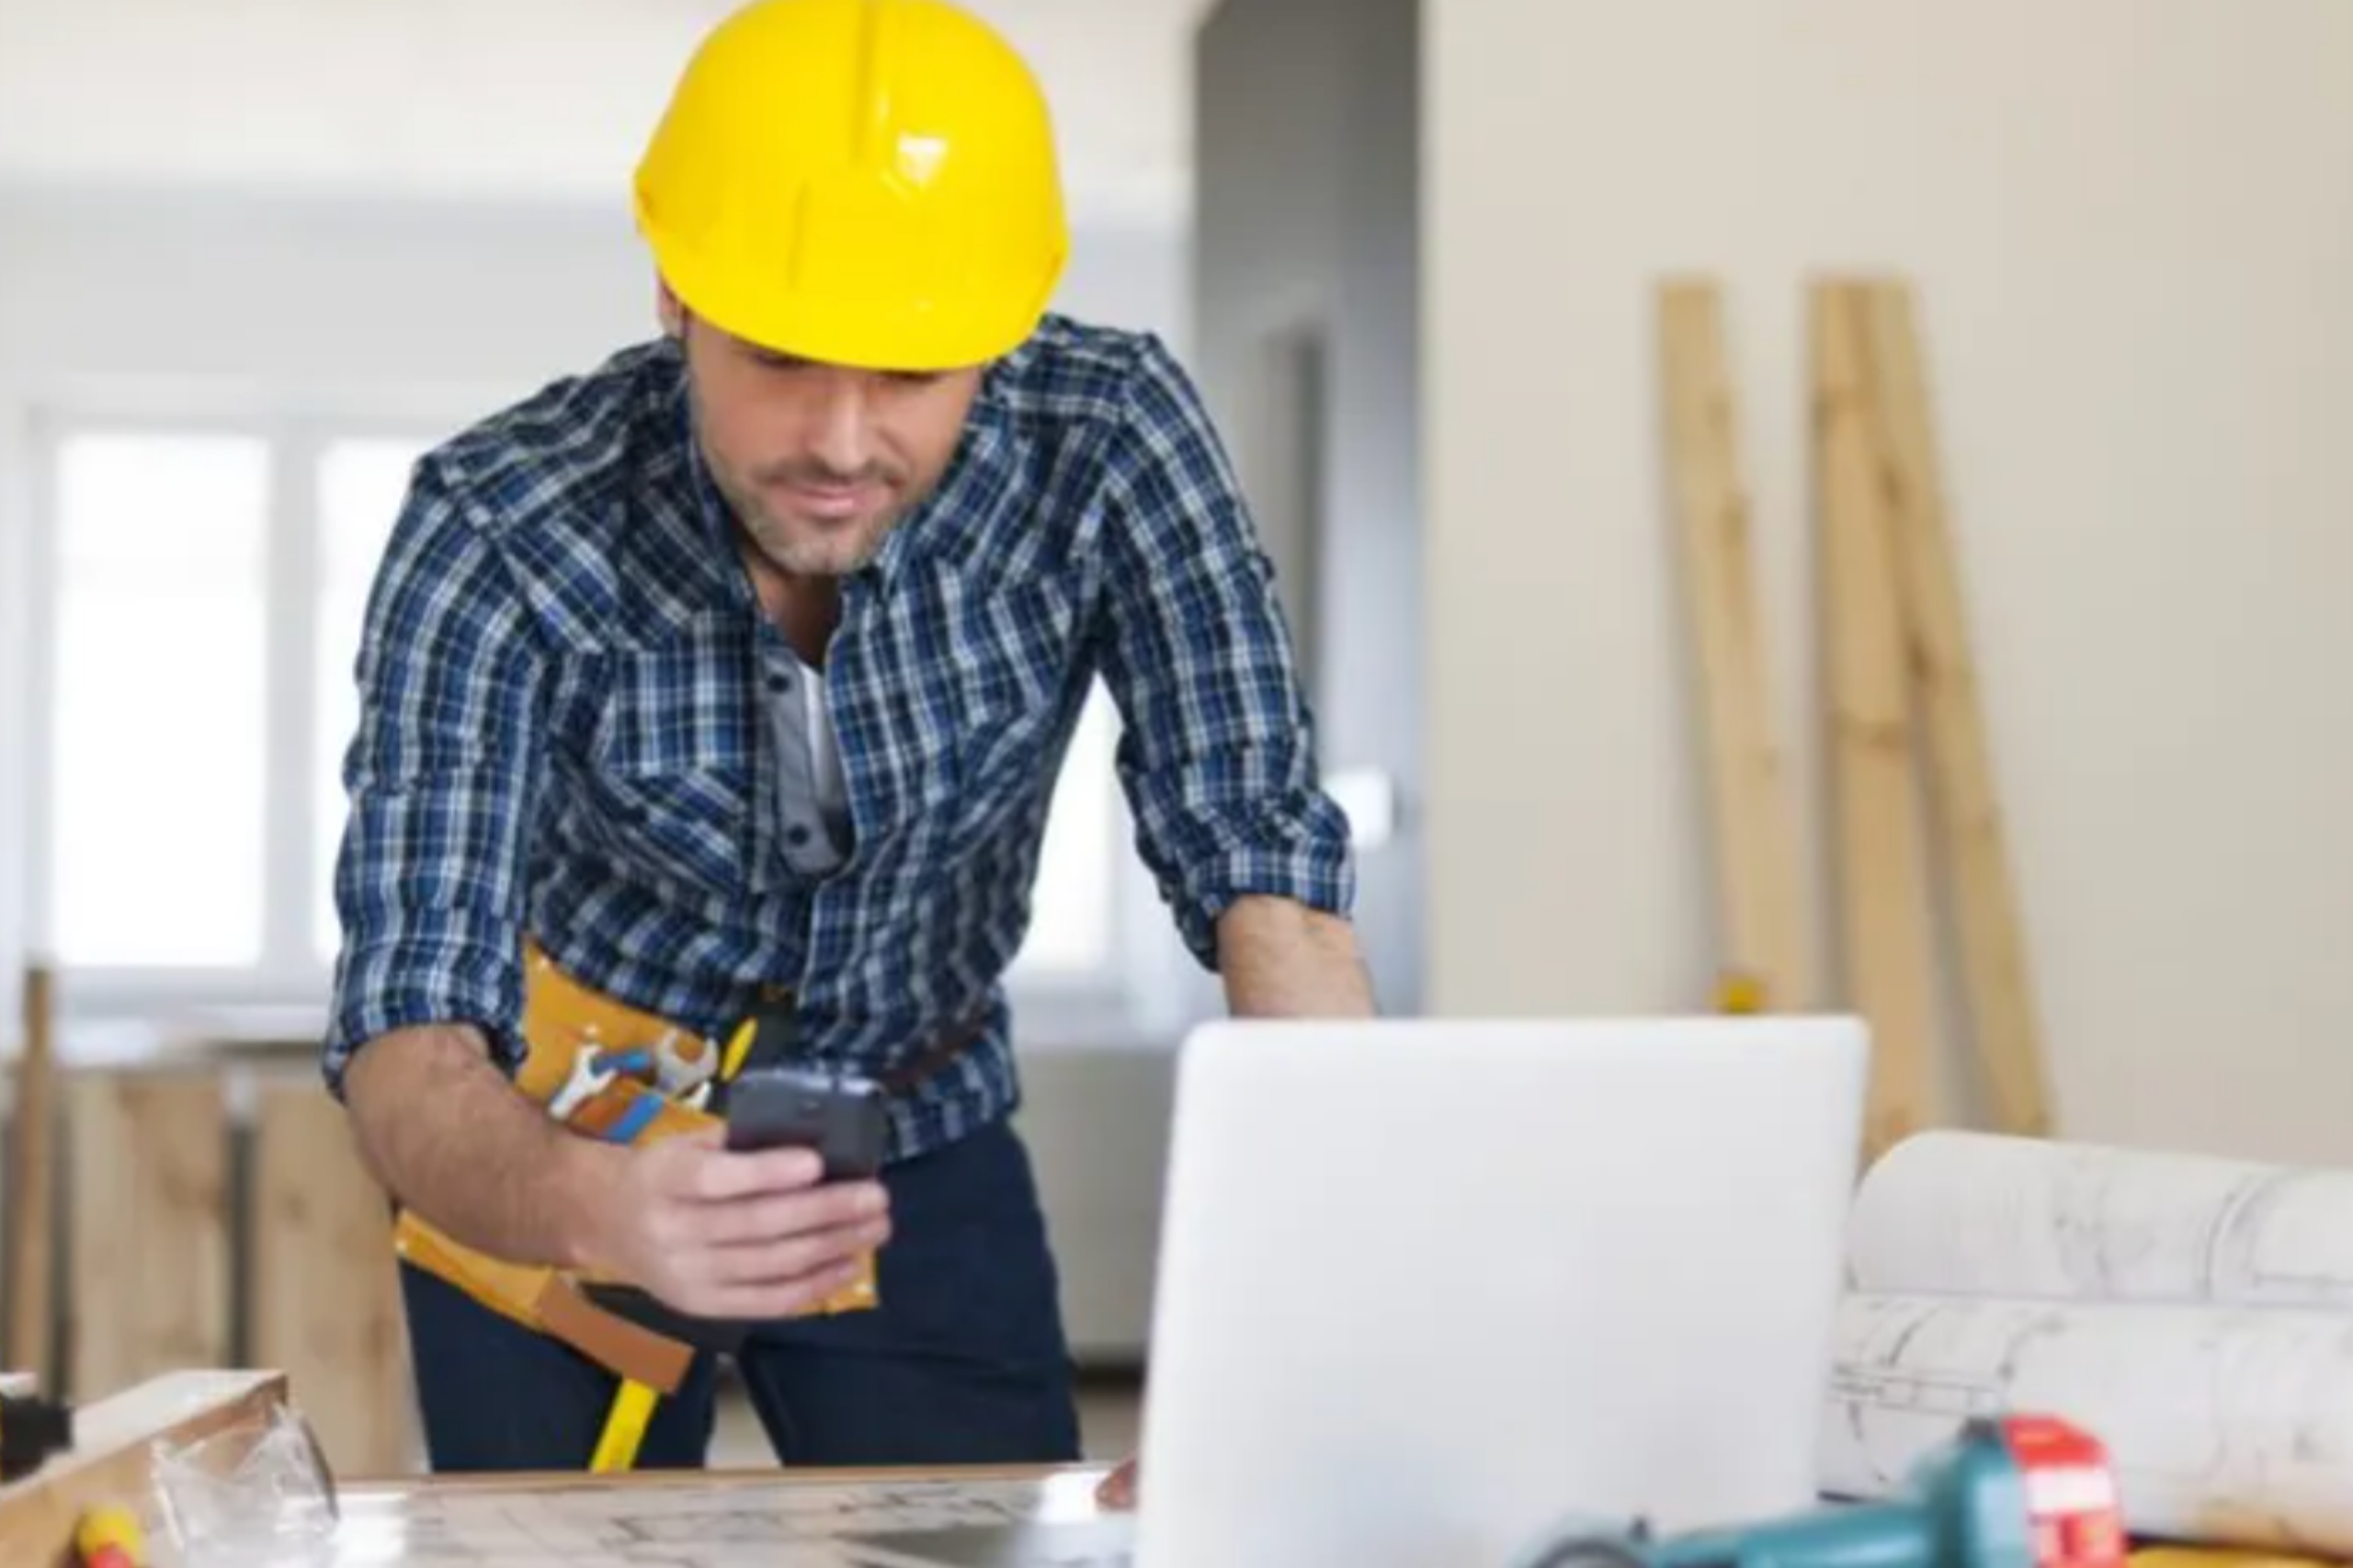 pros-and-cons-assessing-the-3-types-of-remodeling-contractors